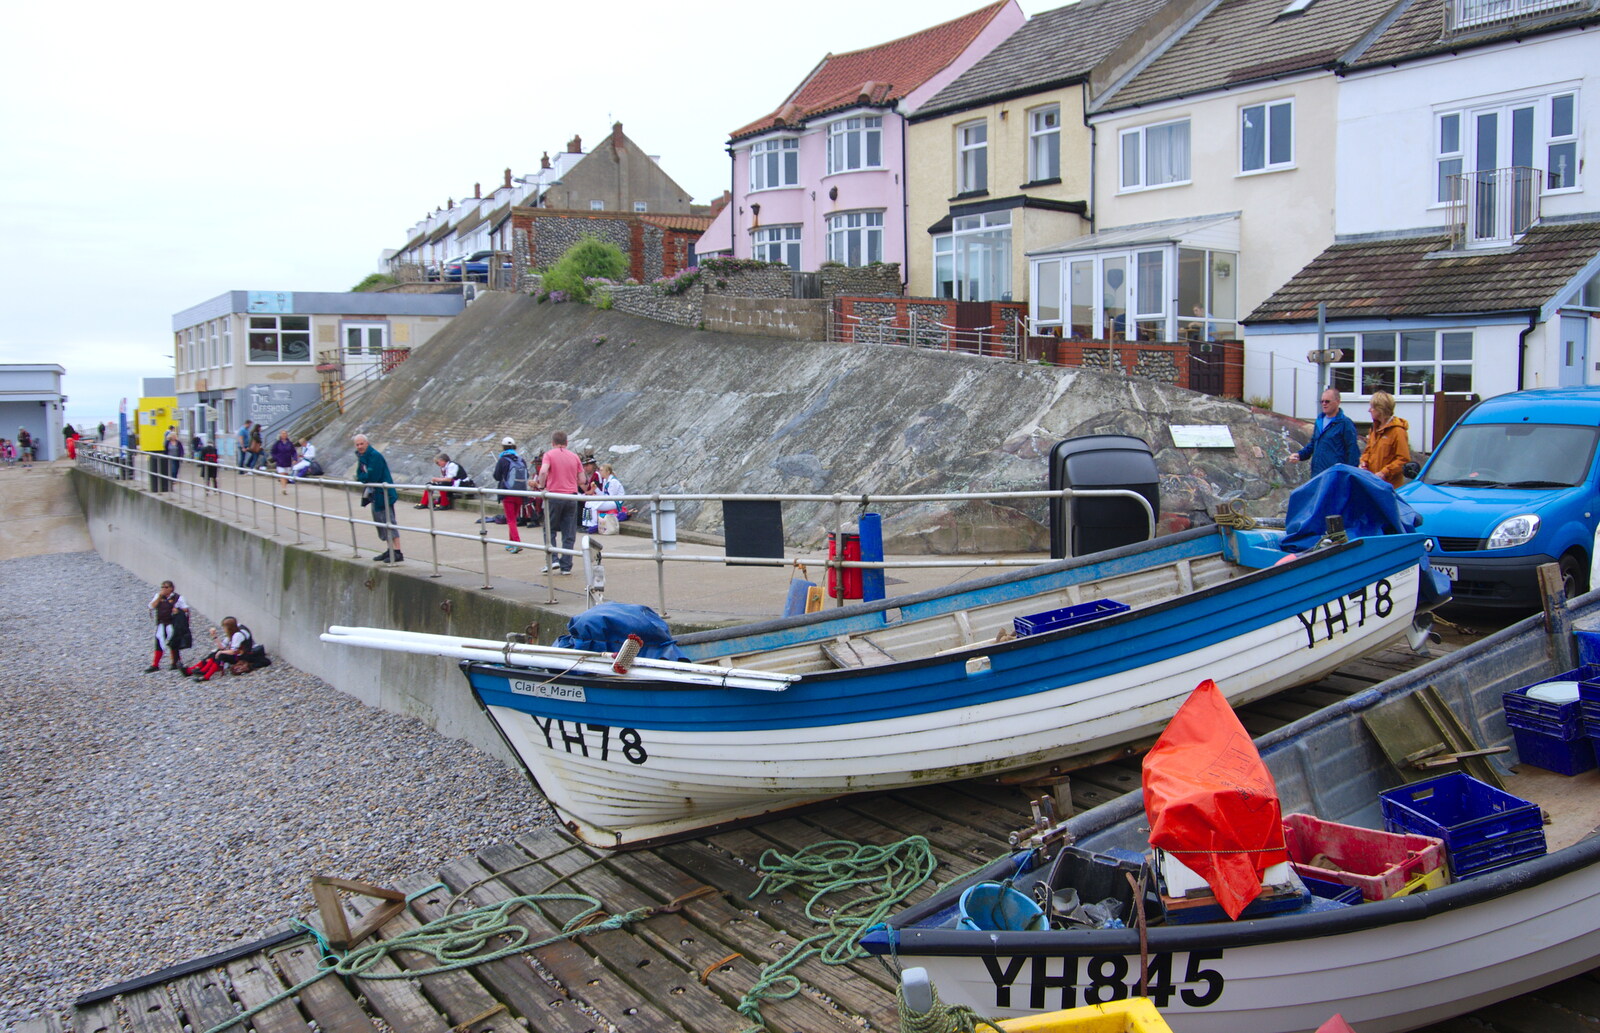 The fisherman's slipway at Sheringham from Kelling Camping and the Potty Morris Festival, Sheringham, North Norfolk - 6th July 2019